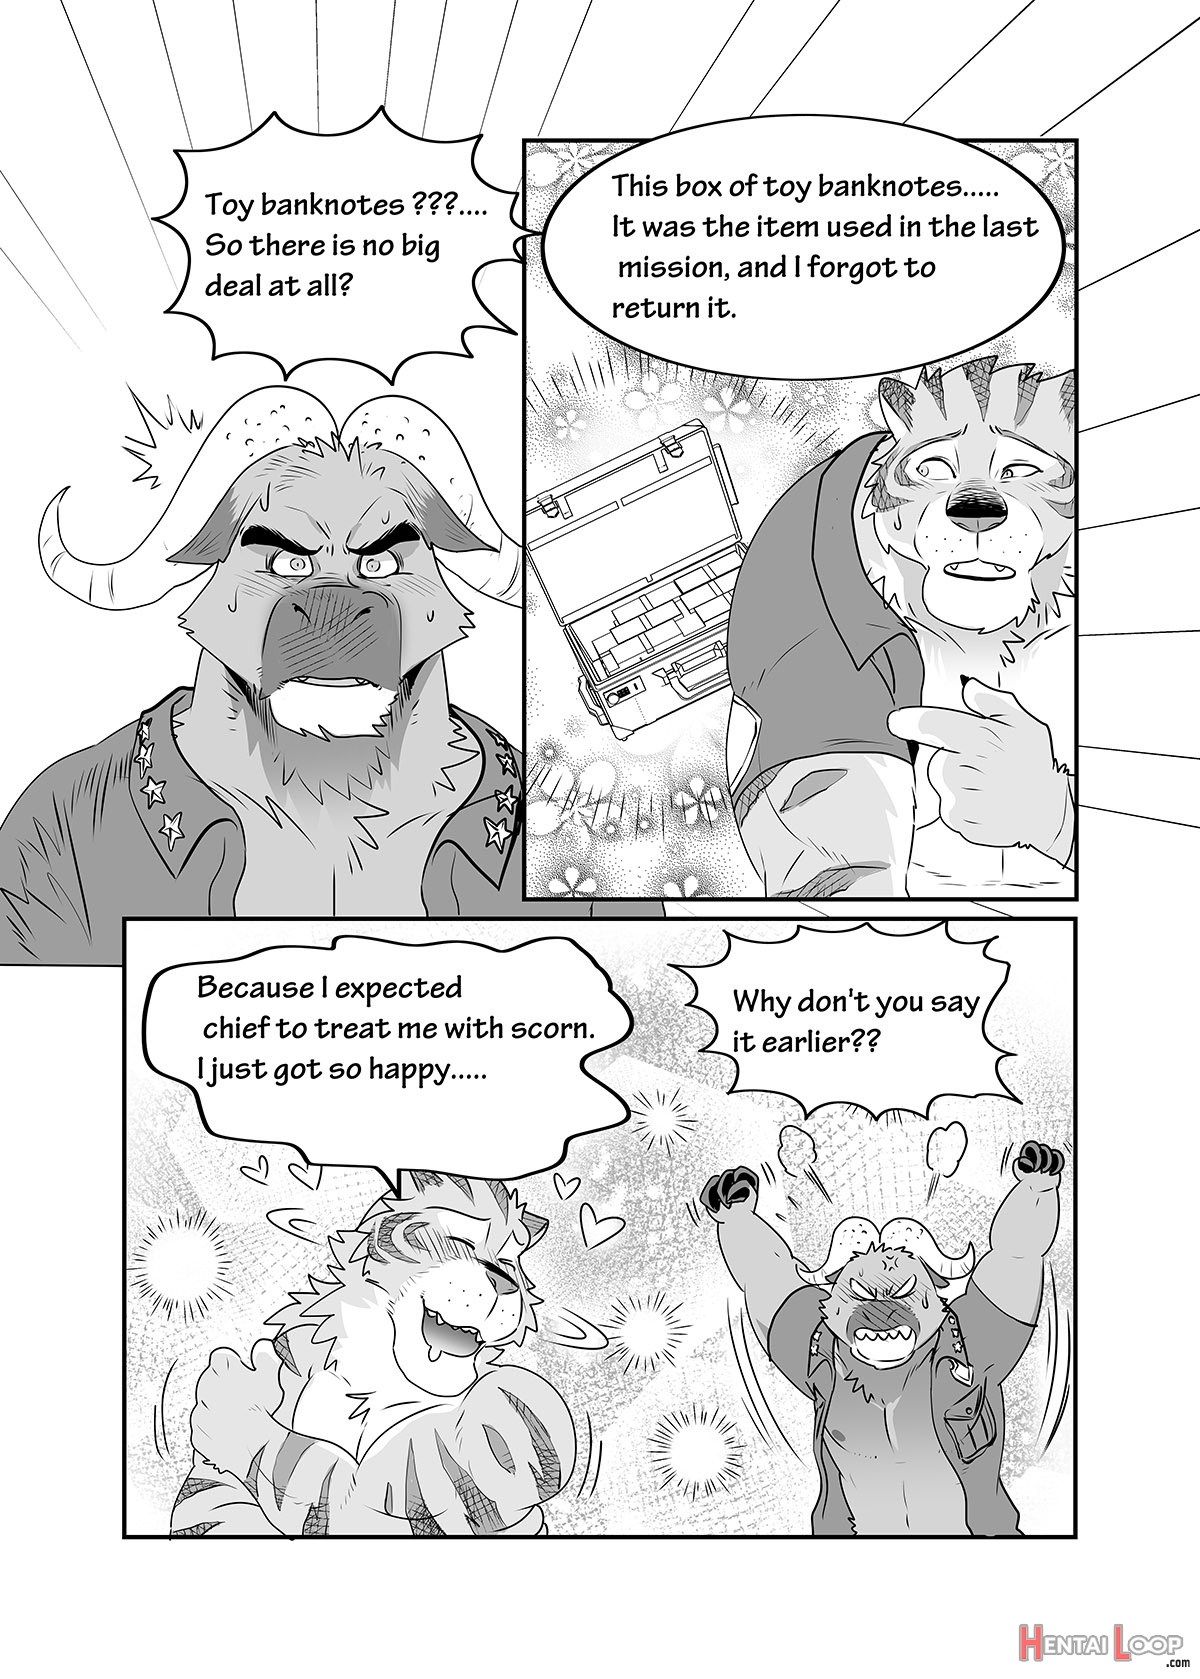 Chief Bogo Found A Dirty Police page 19